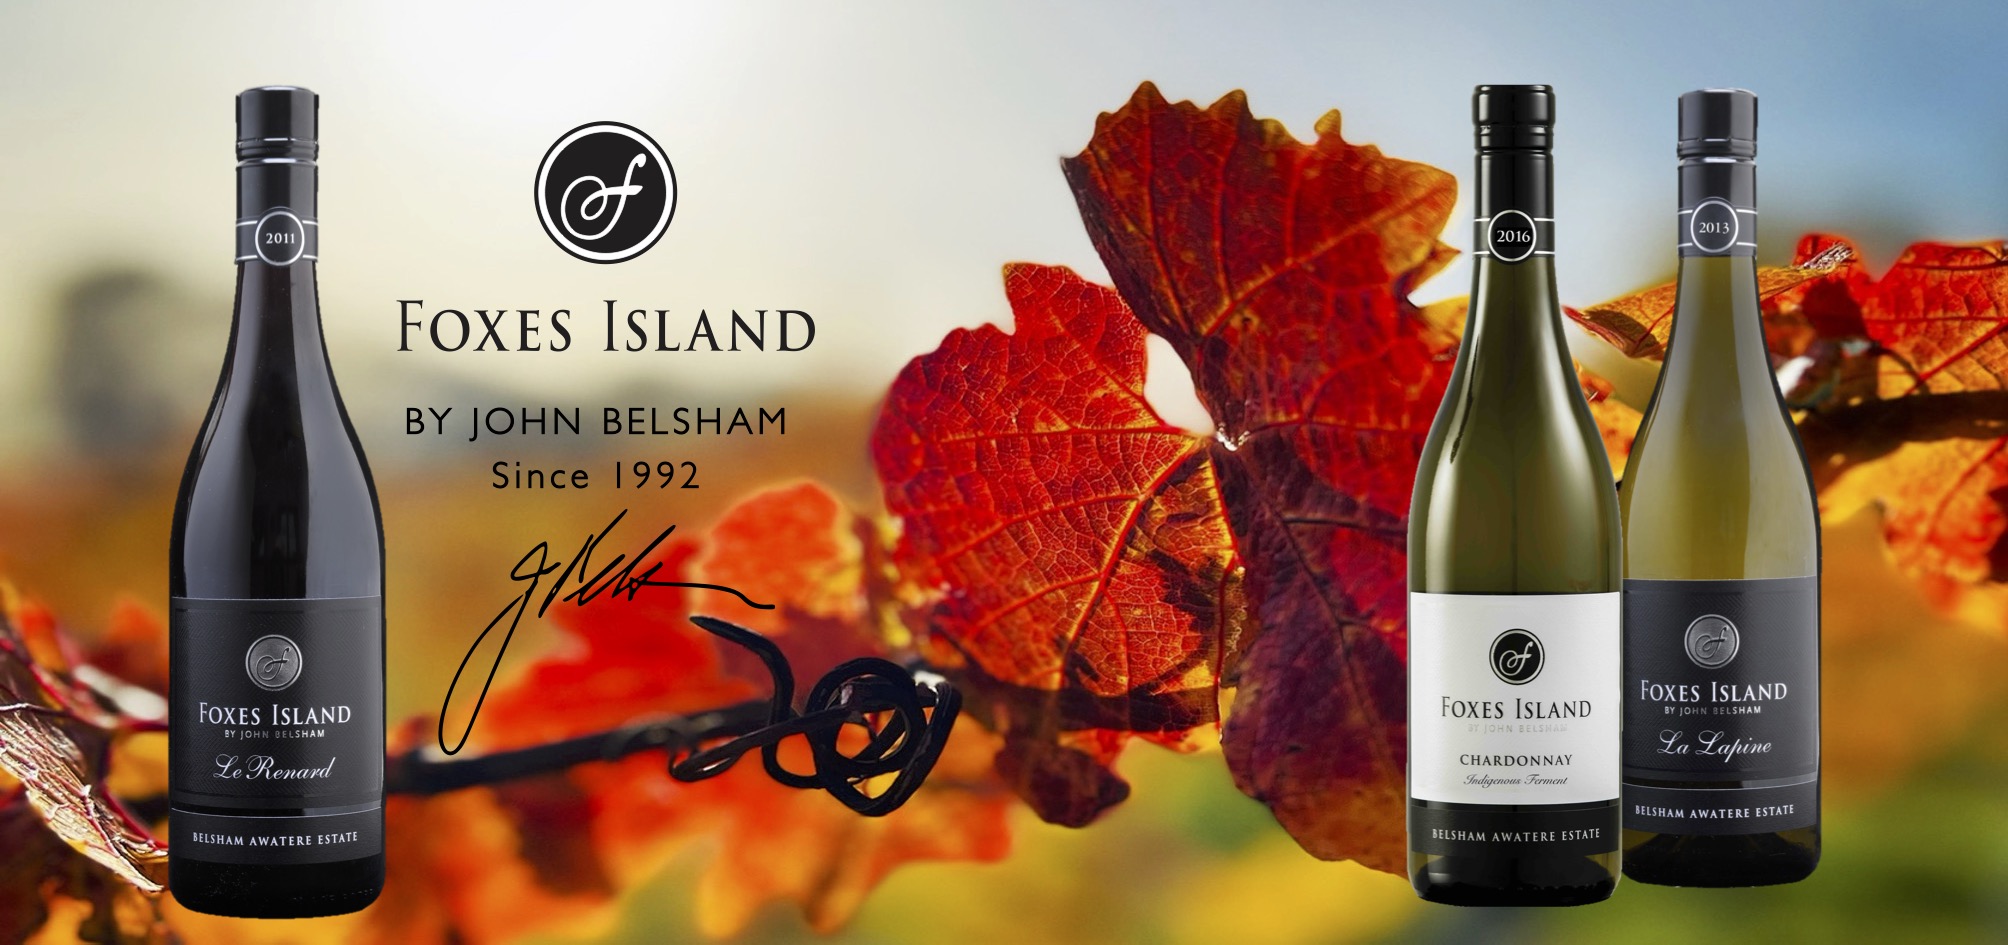 Foxes Island Wines 